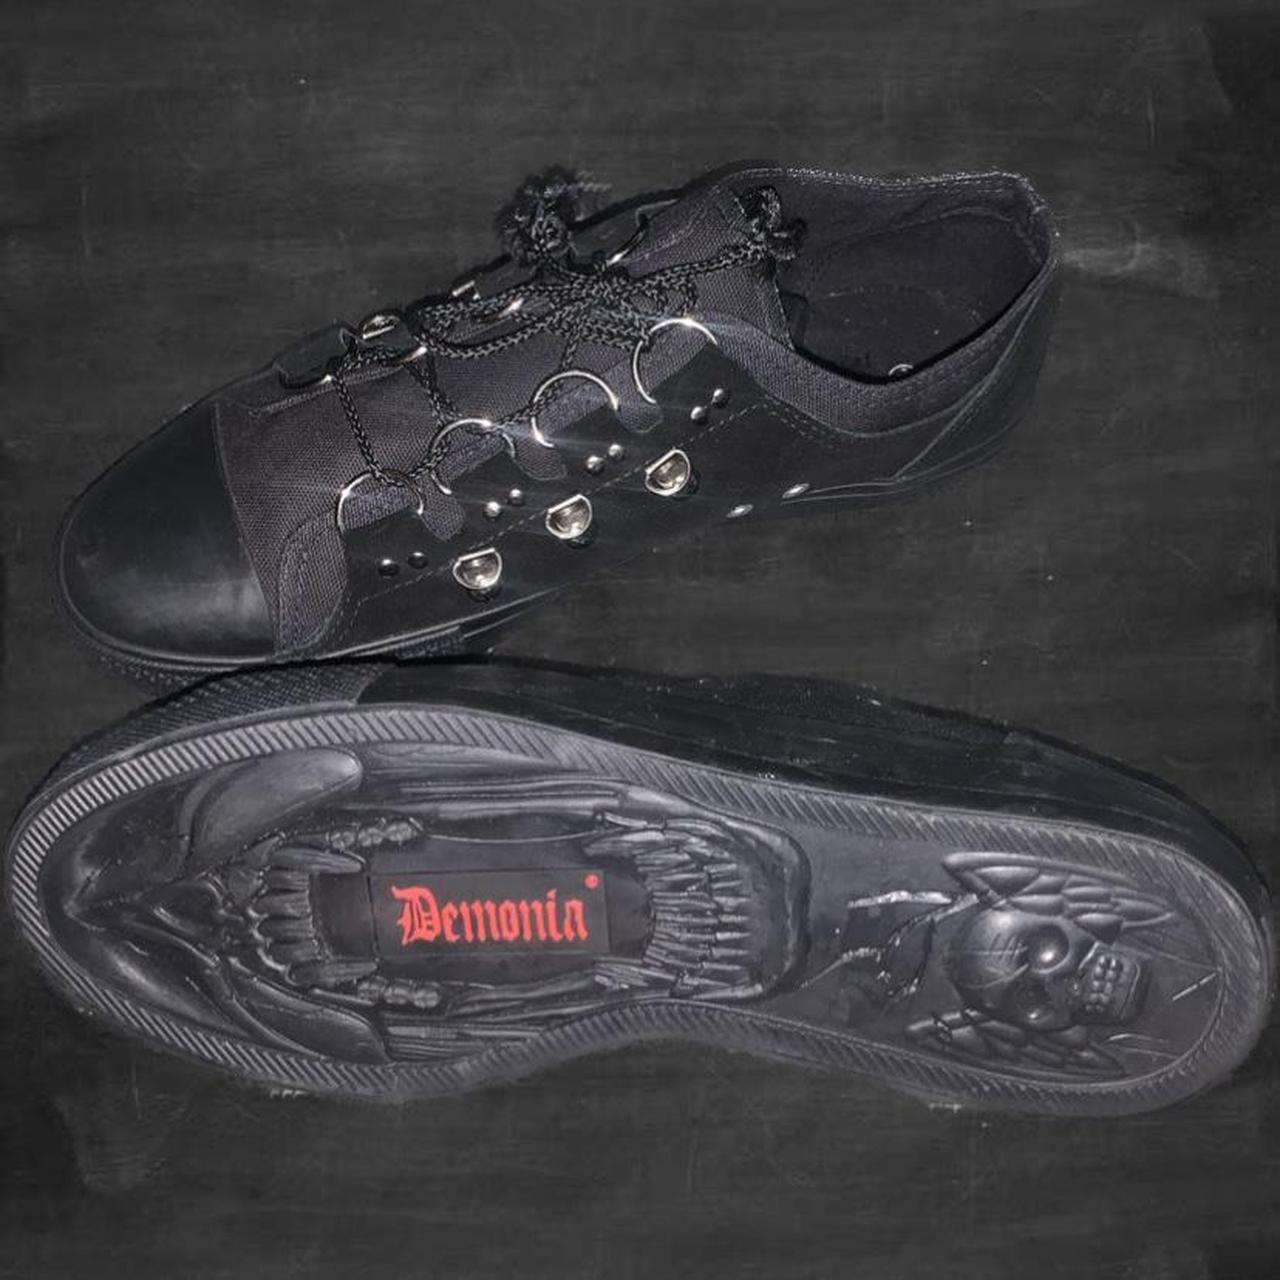 Demonia Men's Black and Silver Trainers (3)